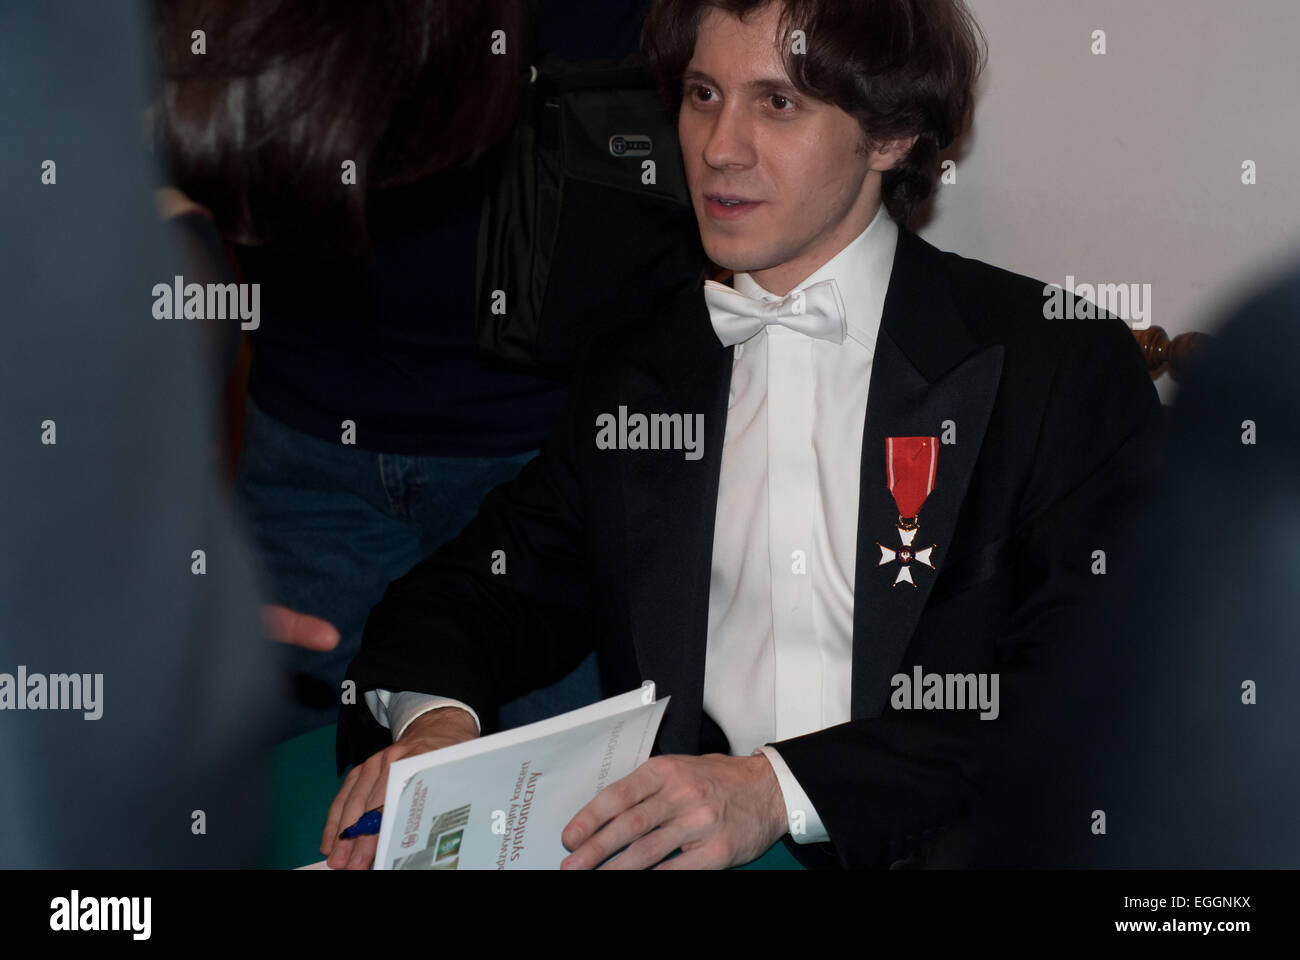 Warsaw, Poland. 24th February, 2015. Polish pianist Rafał Blechacz takes autographs after his concert in Warsaw Philharmonic when he was honoured by Knight's Cross Order of Polonia Restituta Credit:  Jakub Siemiaczko/Alamy Live News Stock Photo